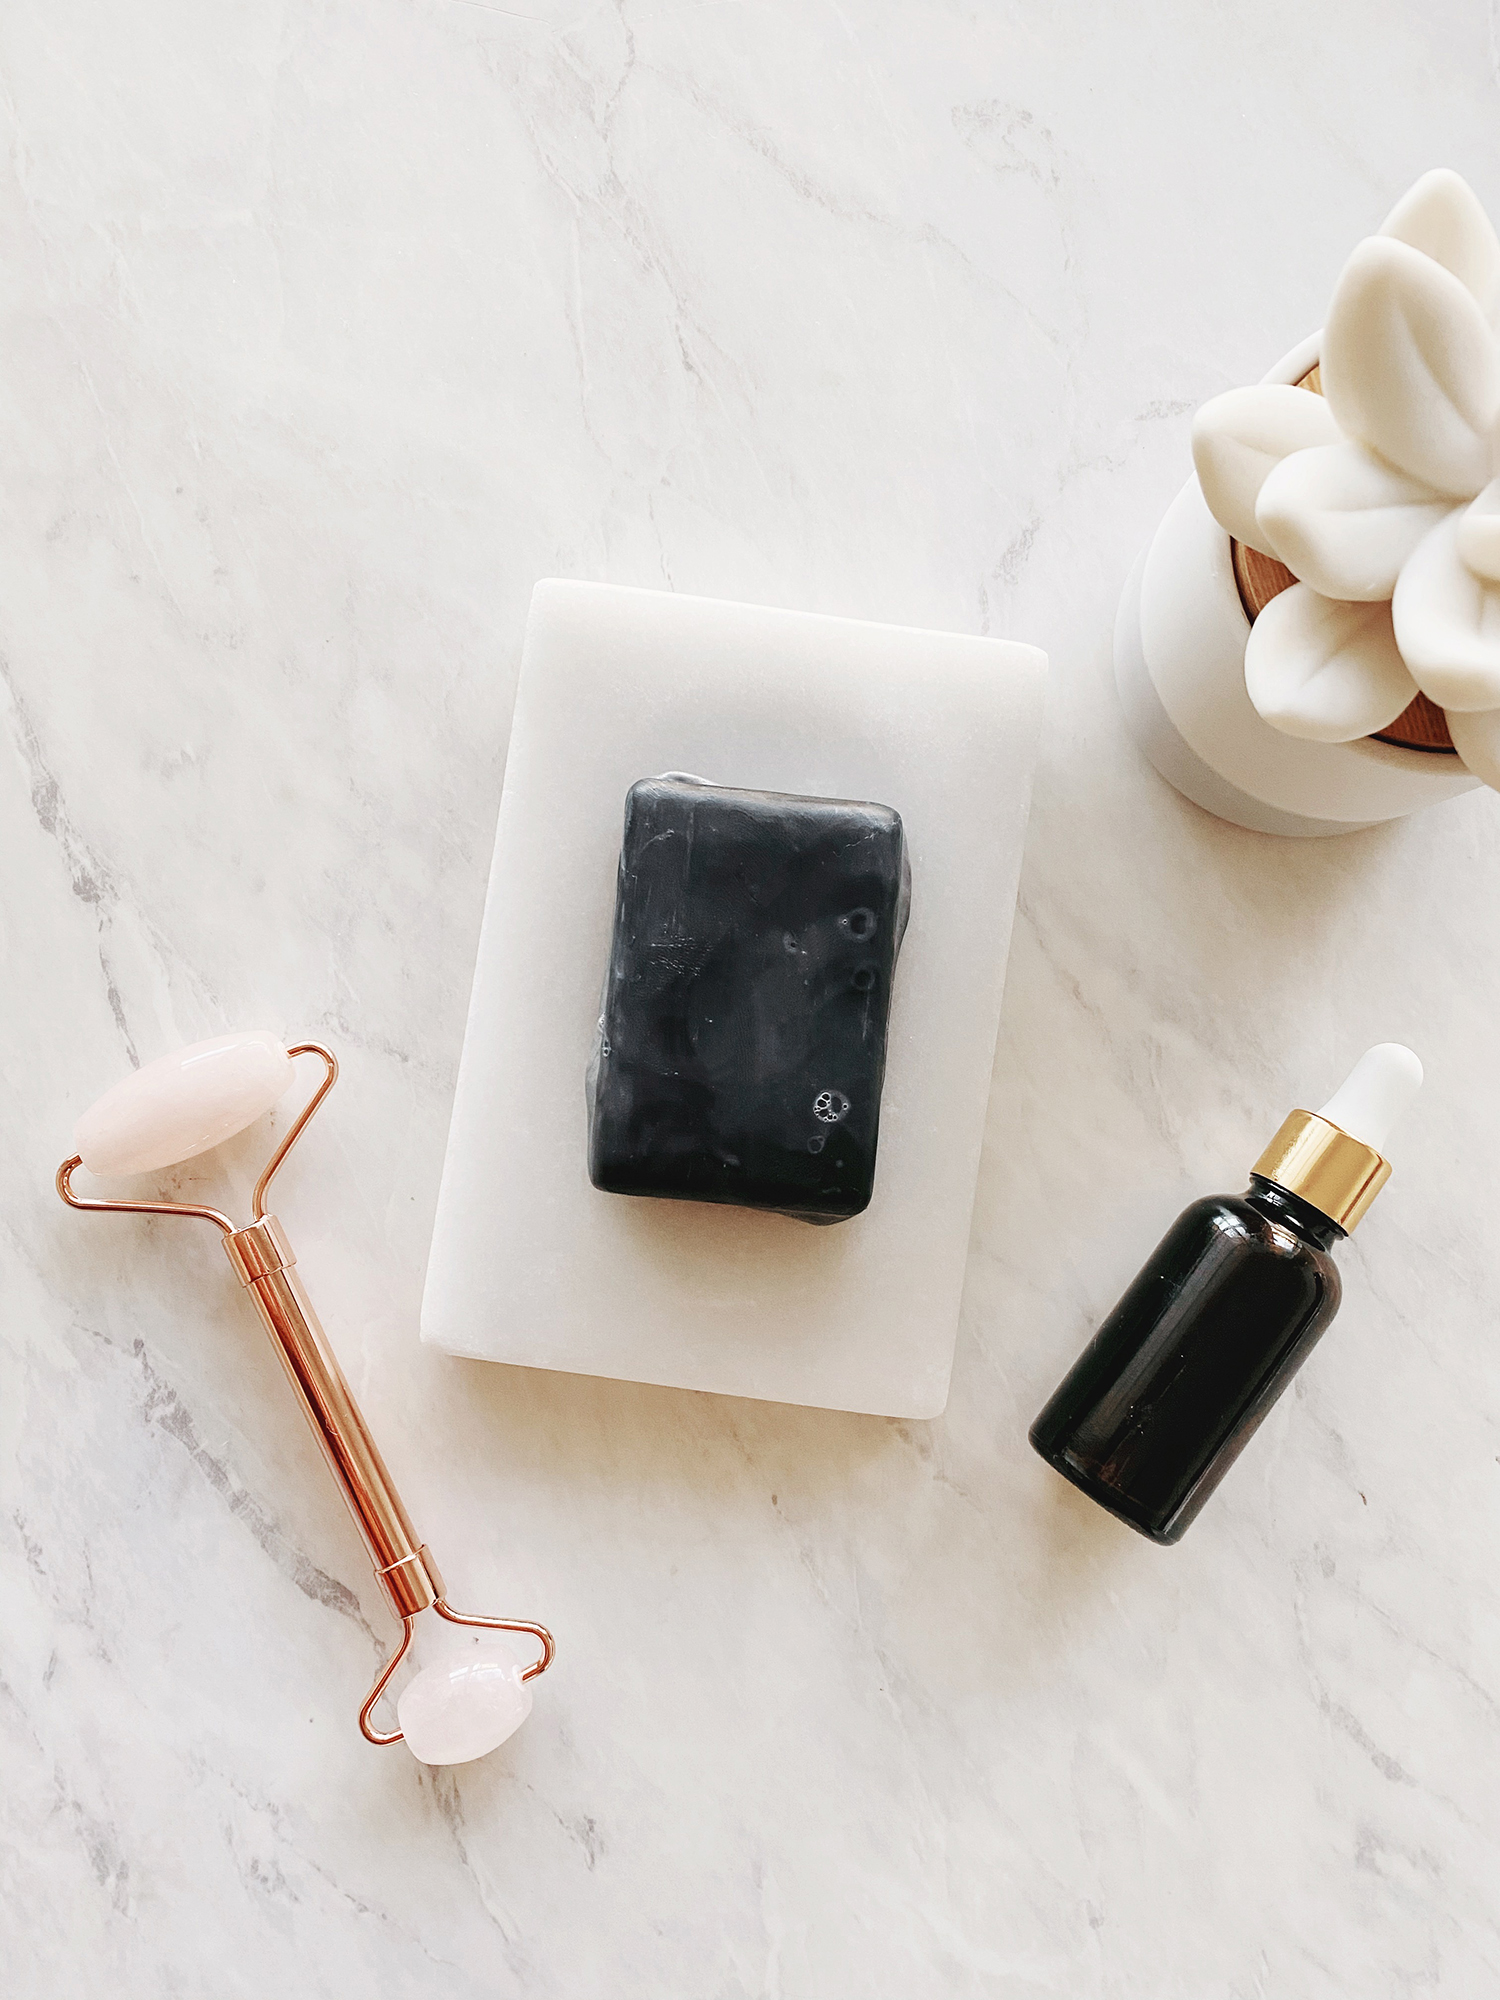 My skin has transformed with the help of charcoal and clean skincare products. I am sharing the top five benefits of charcoal and what clean skincare can do for the health of your skin. Dive into another edition of #WellnessWednesday and read more on KaraLayne.com!